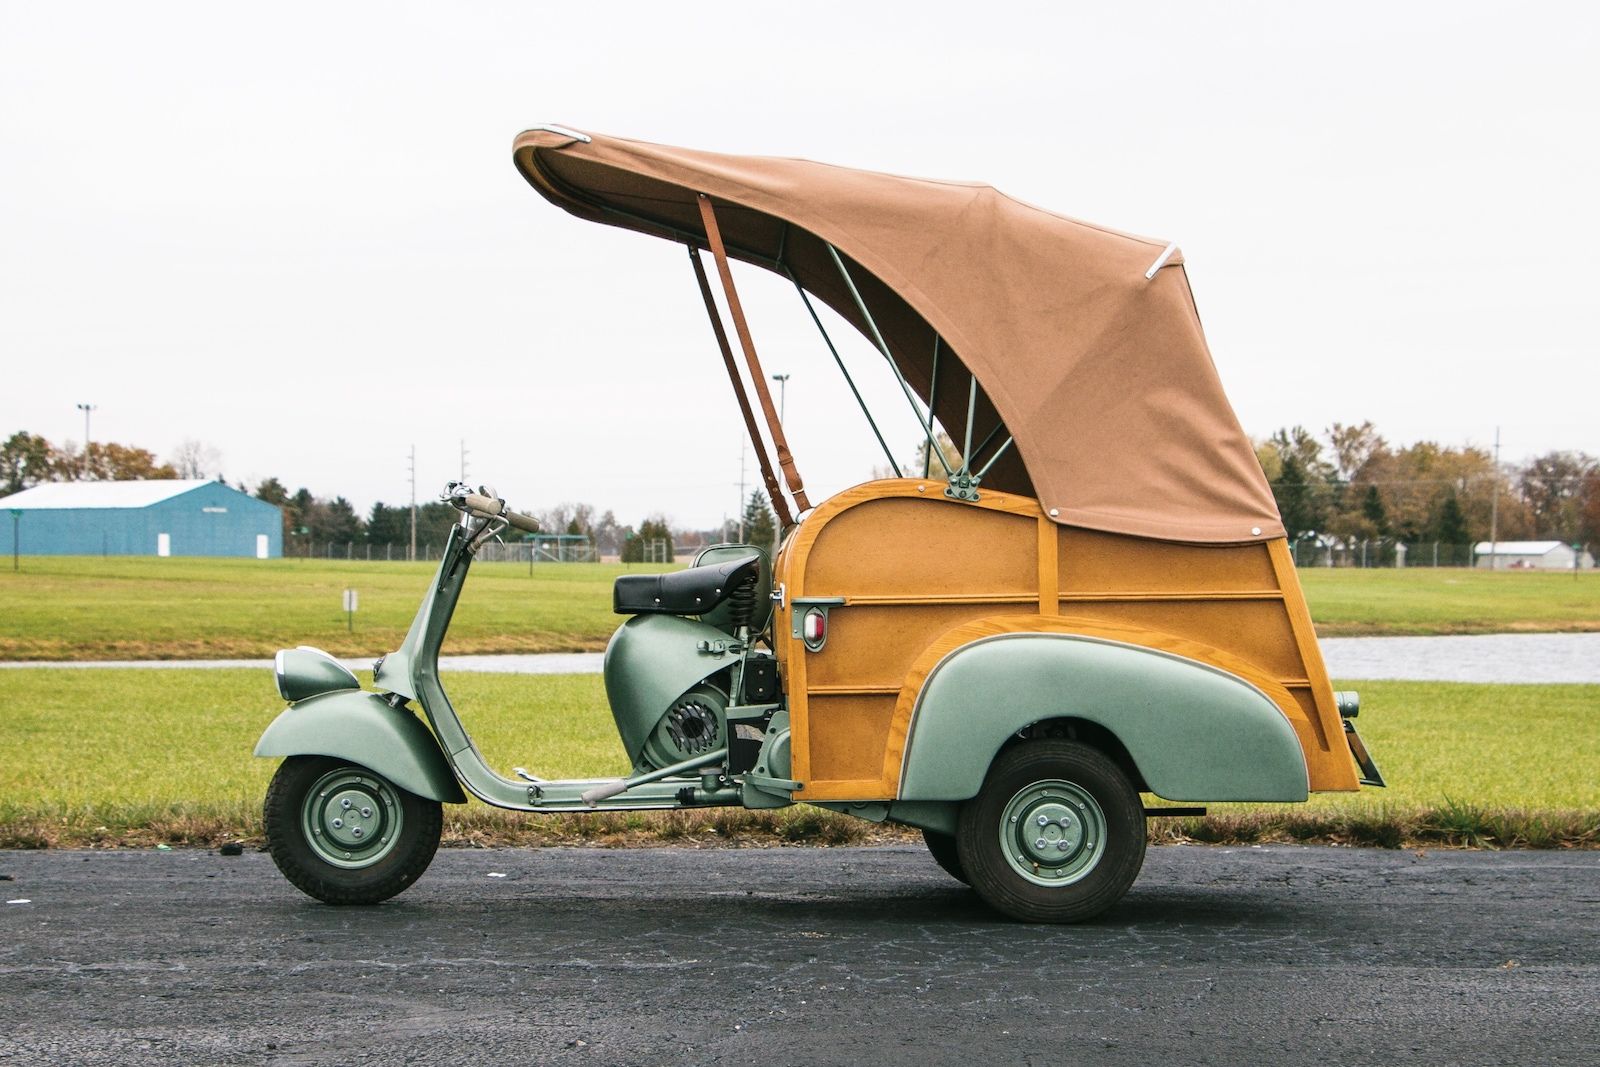 The Weird And Wonderful Honda Motocompo – A Scooter That Fits In Your Trunk